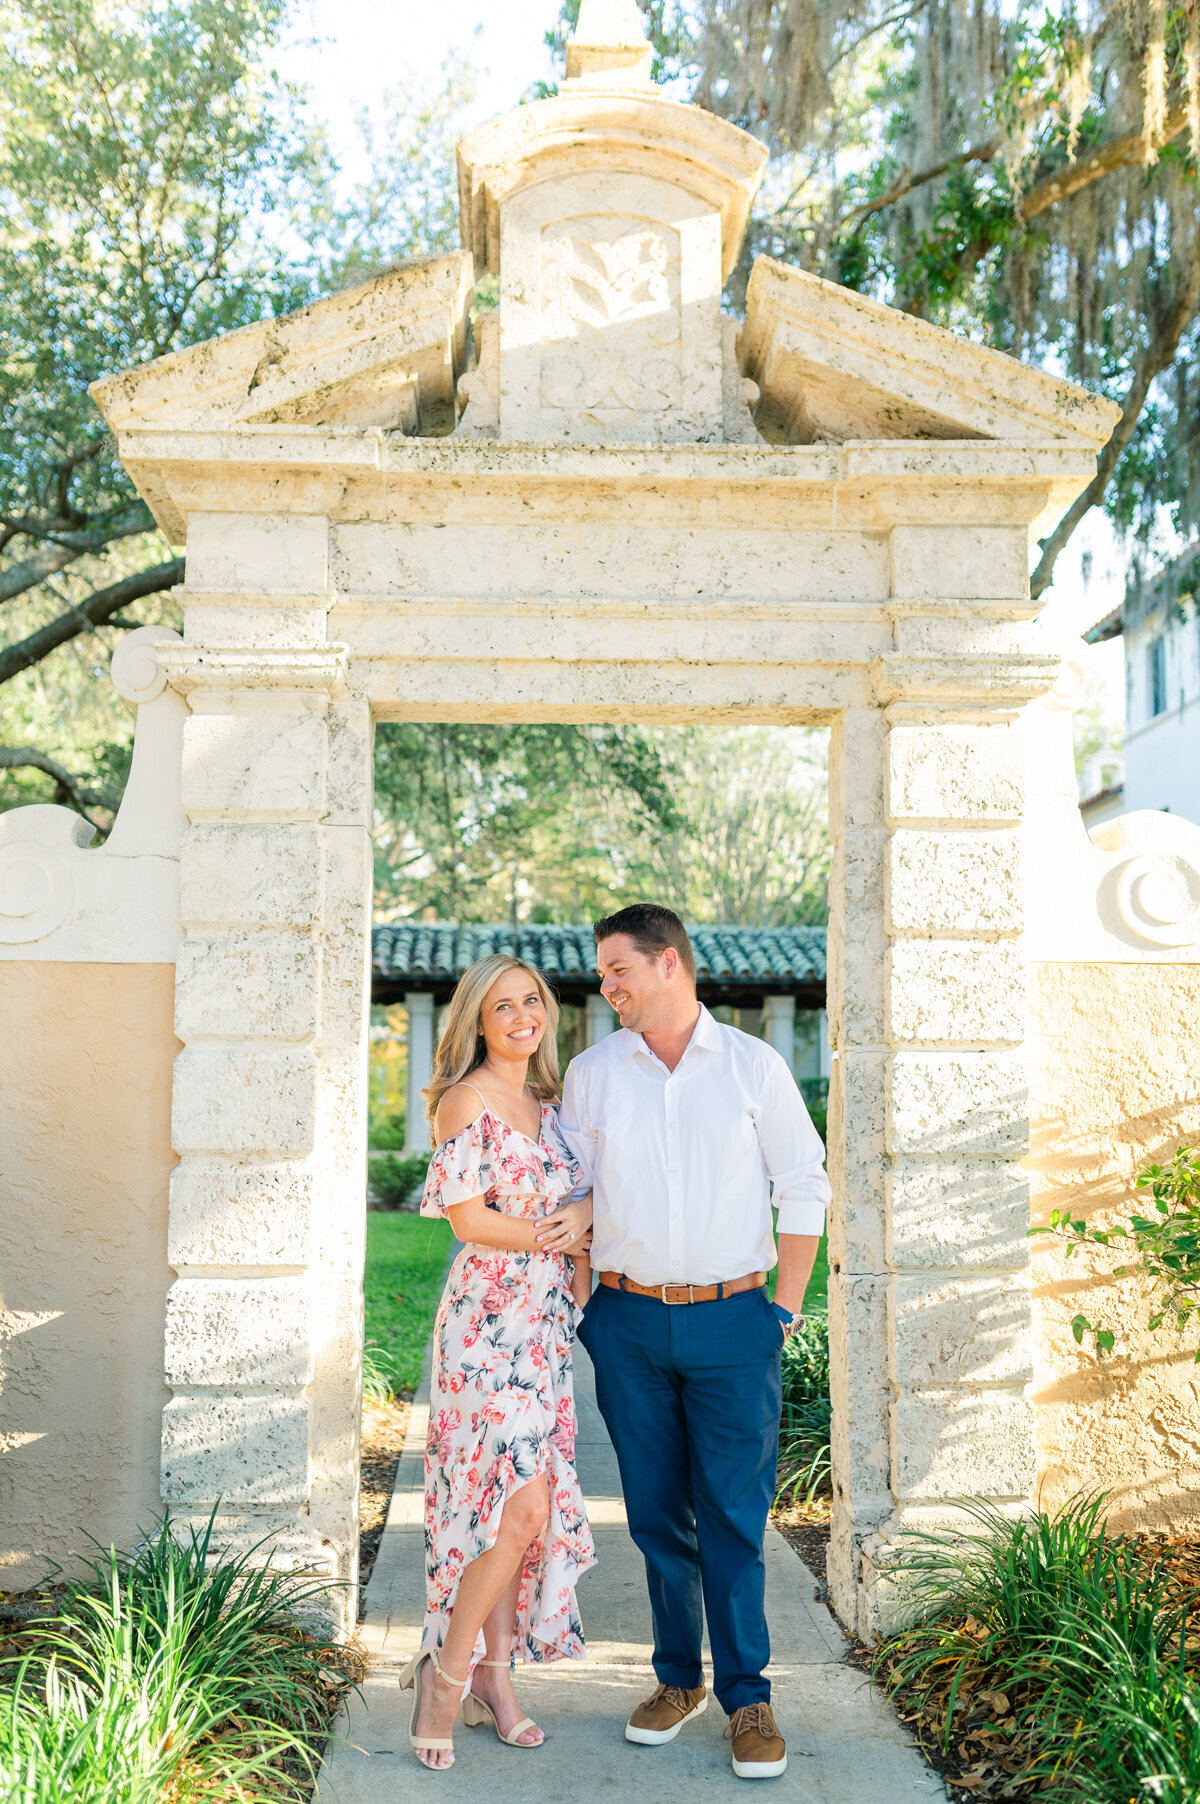 Nicky & Donny | Rollins College Engagement | Lisa Marshall Photography-9